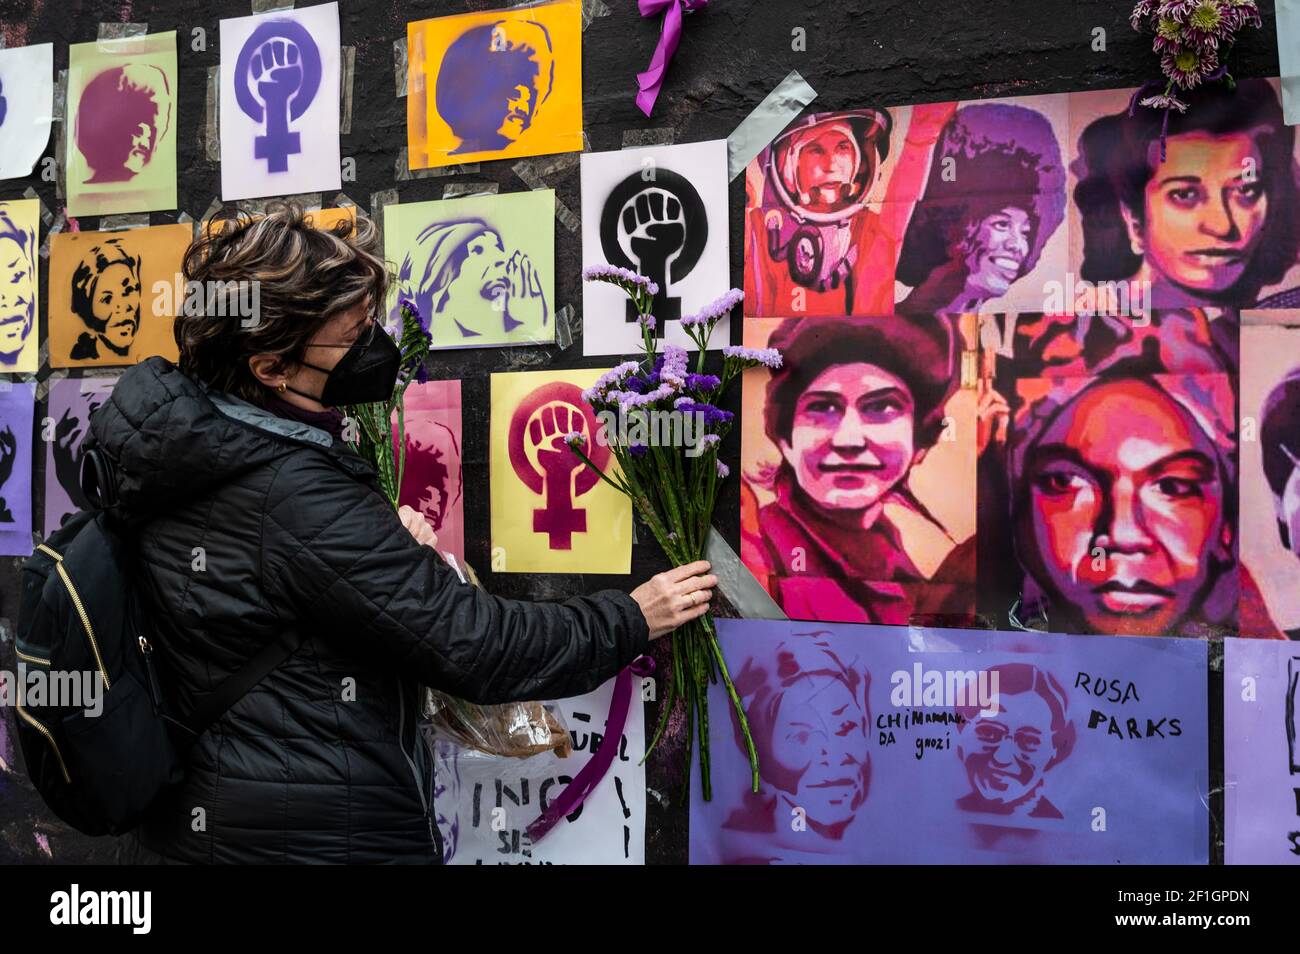 Madrid, Spain. 8th March, 2021. A woman placing flowers in a feminist mural that appeared today vandalized during International Women's Day. Placards of women have been placed over the paintings after the mural was vandalized with black paint. The mural represents famous women from around the world, with the faces of 15 women who are part of history for their fight in favor of equality: Angela Davis, Frida Kahlo, Nina Simone, Rigoberta Menchu, Lucia Sanchez Saornil, Rosa Arauzo, Valentina Tereshkova, Chimamanda Ngozi, Emma Goldman, Kanno Sugato, Liudmila Pavlichenko, Billy Jean King, Gata Catt Stock Photo